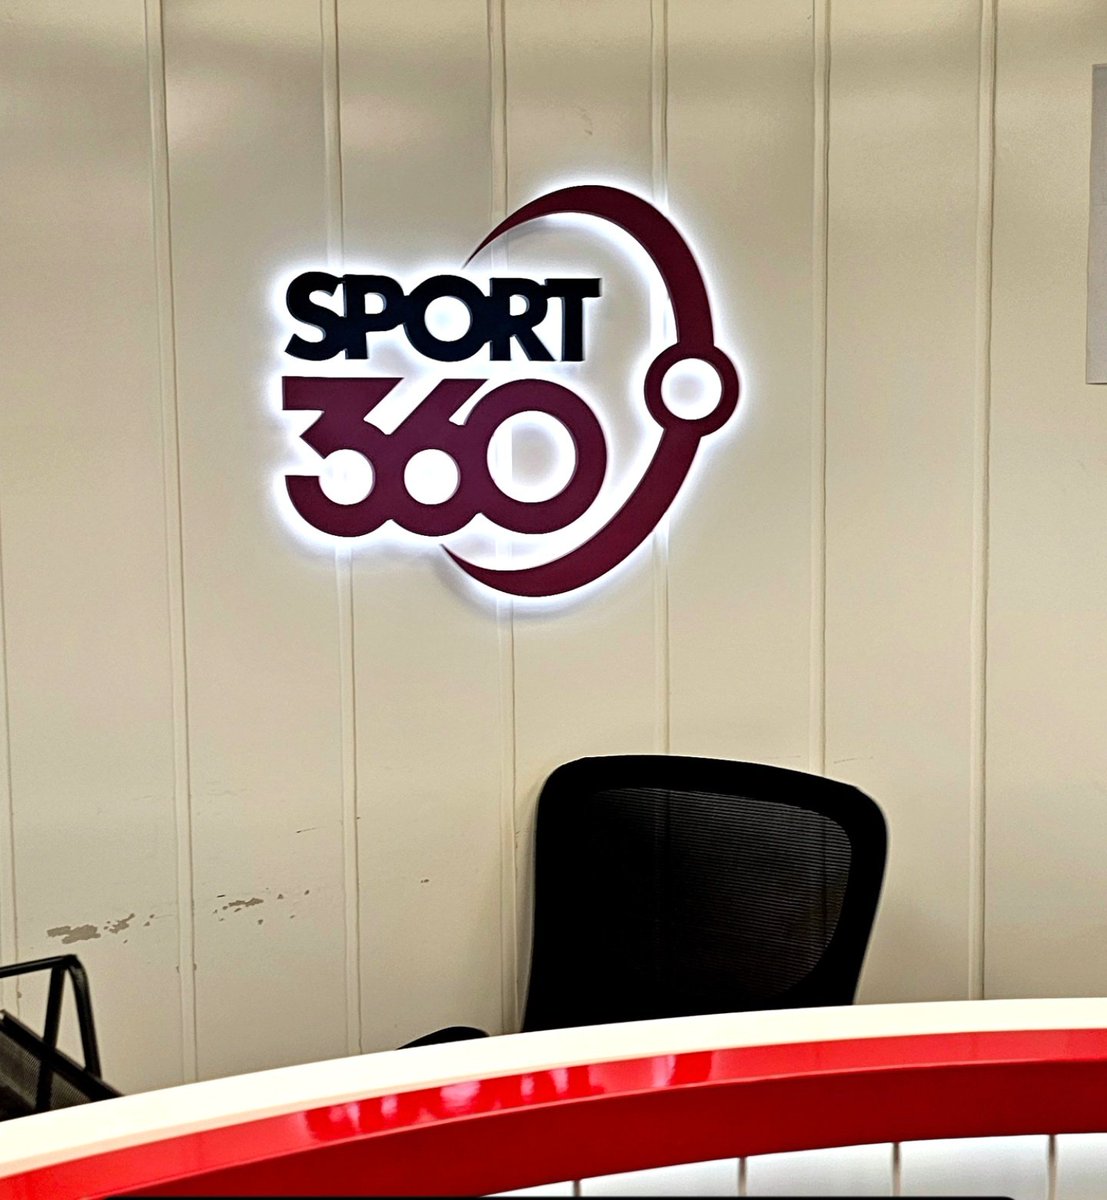 Collaborations are the heartbeat of progress. 
Excited to kickstart incredible projects with @sport36. 💫 
#collaboration #sportspr #sportsmarketing